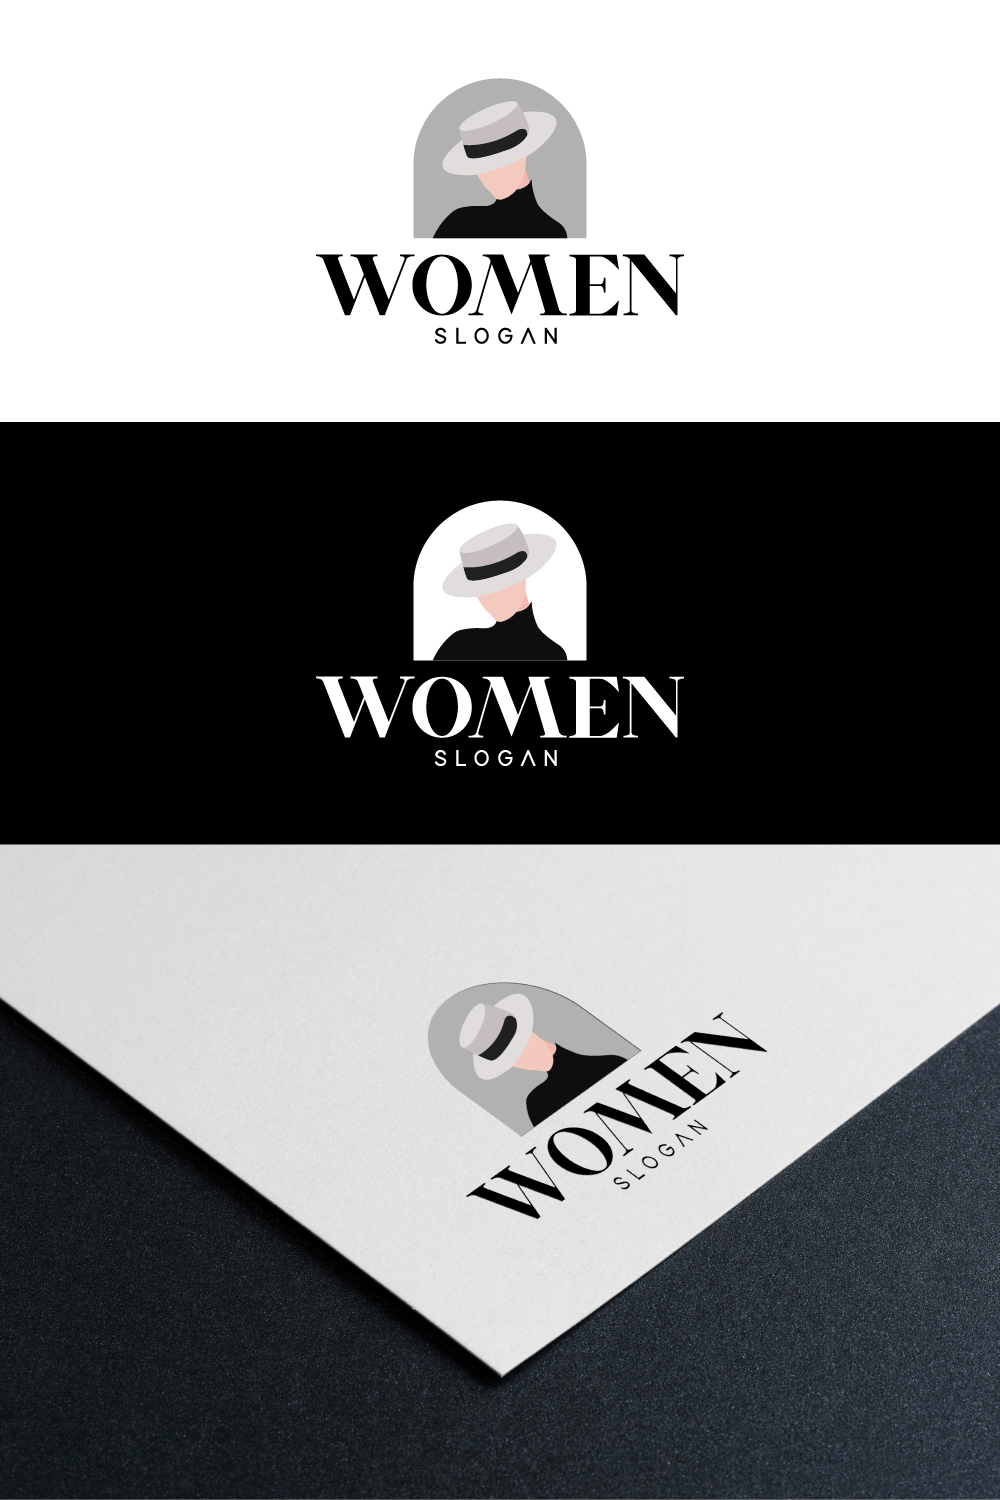 A selection of beautiful logos with the image of a woman in a hat.